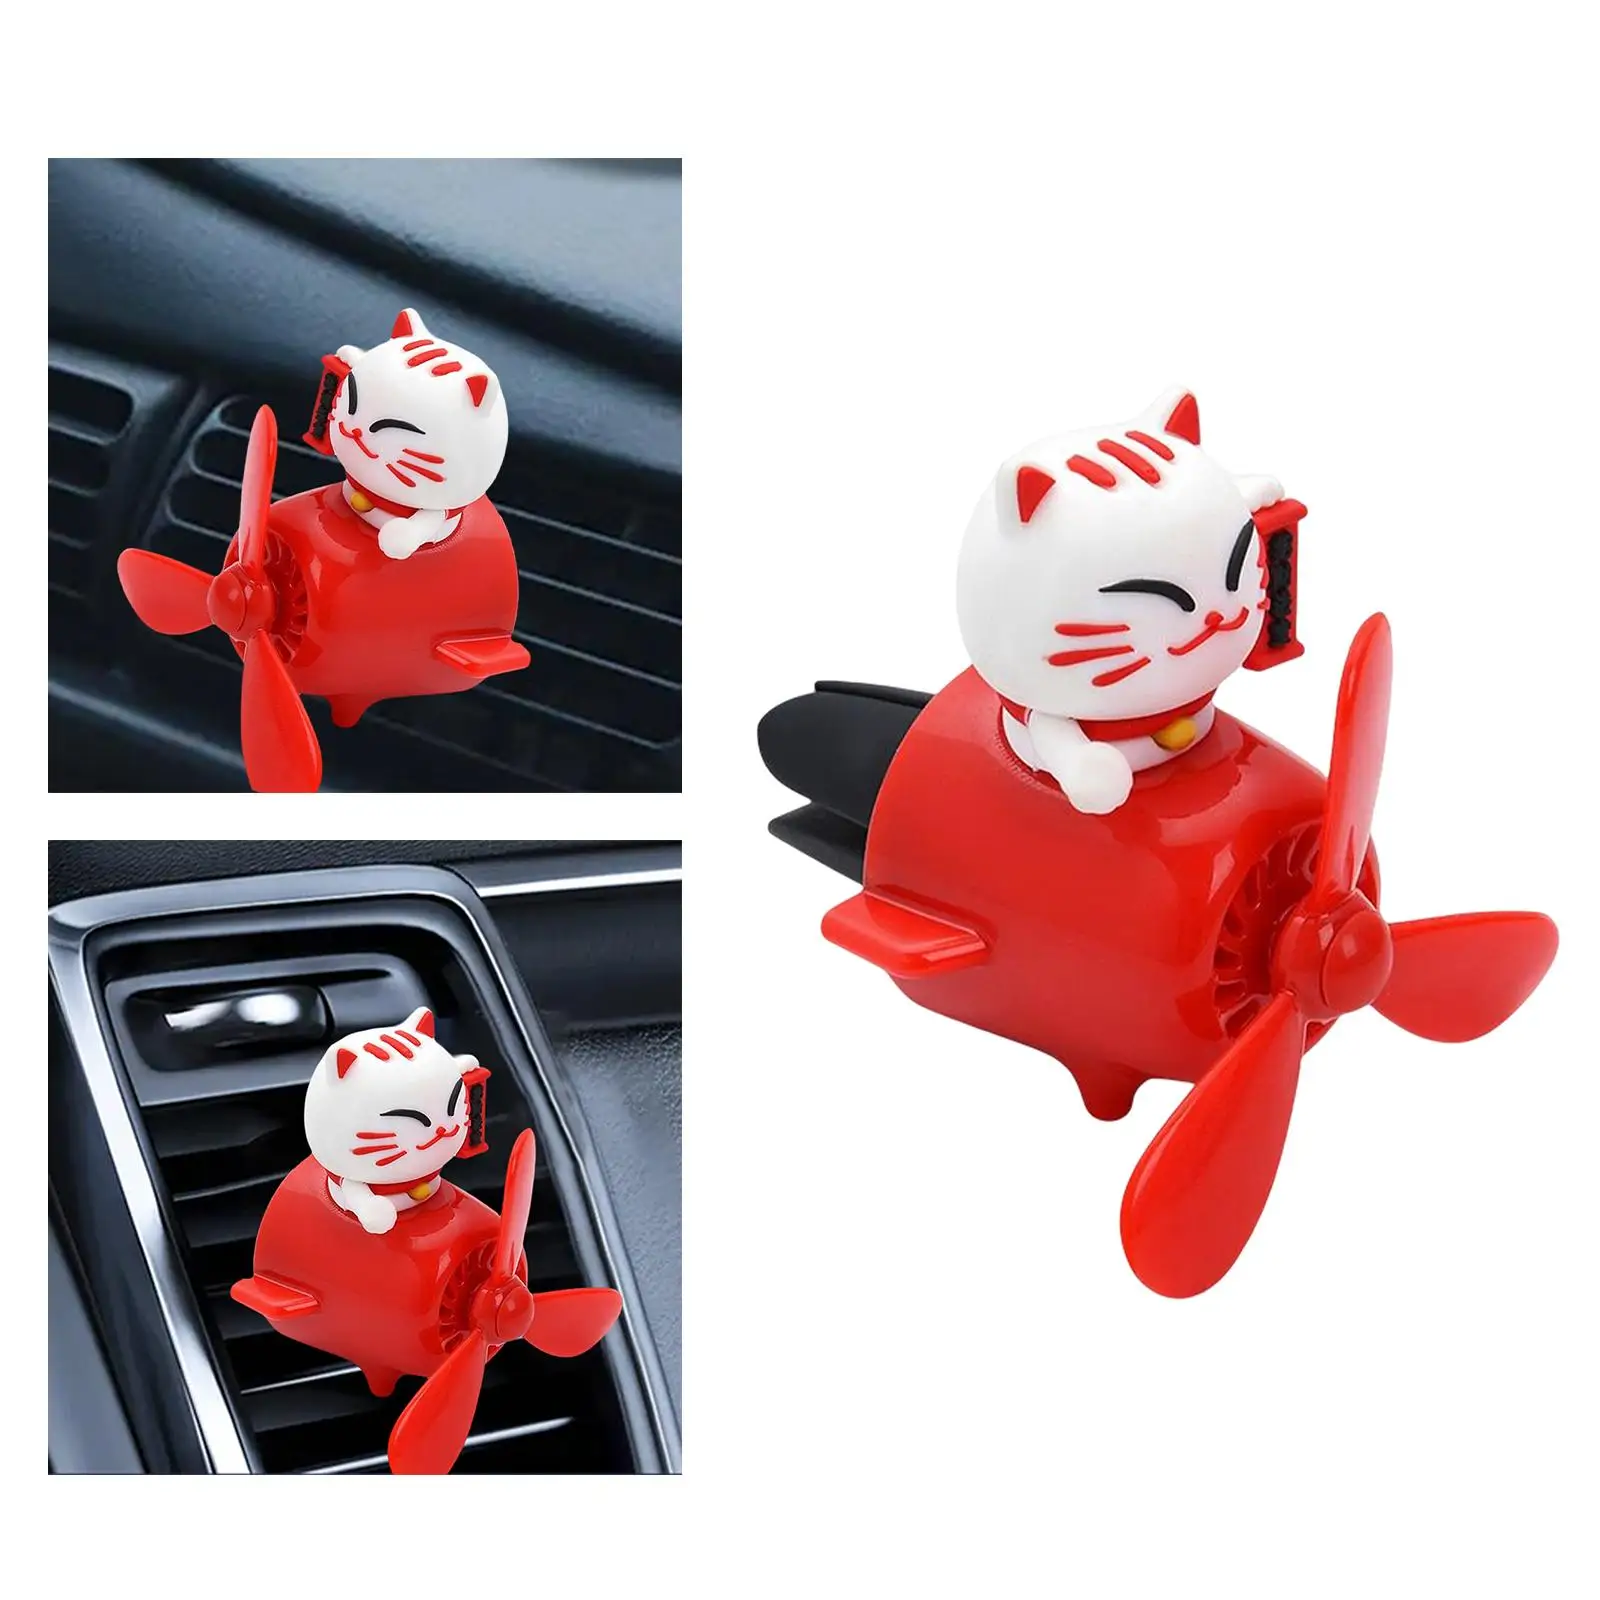 Cat Air Freshener Diffuser Car Accessories Fragrance Gift Rotating Propeller Air Outlet Vent for Women Men Automotive Vehicle